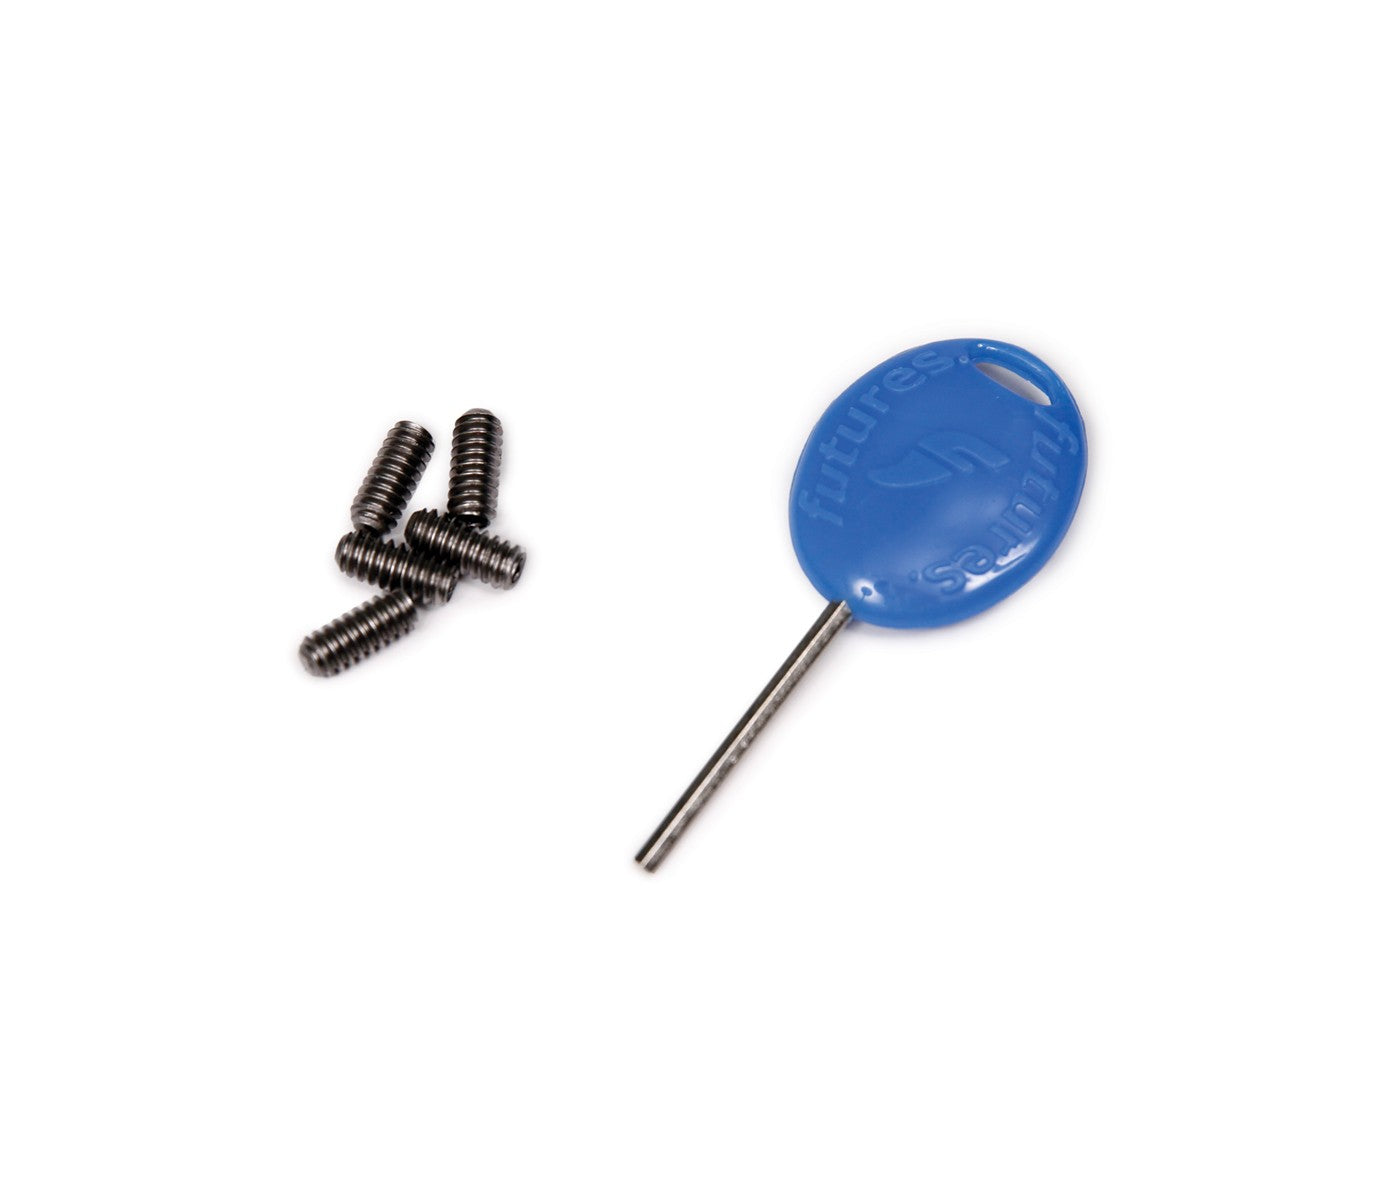 Futures Replacement Fin Screws and Key Kit